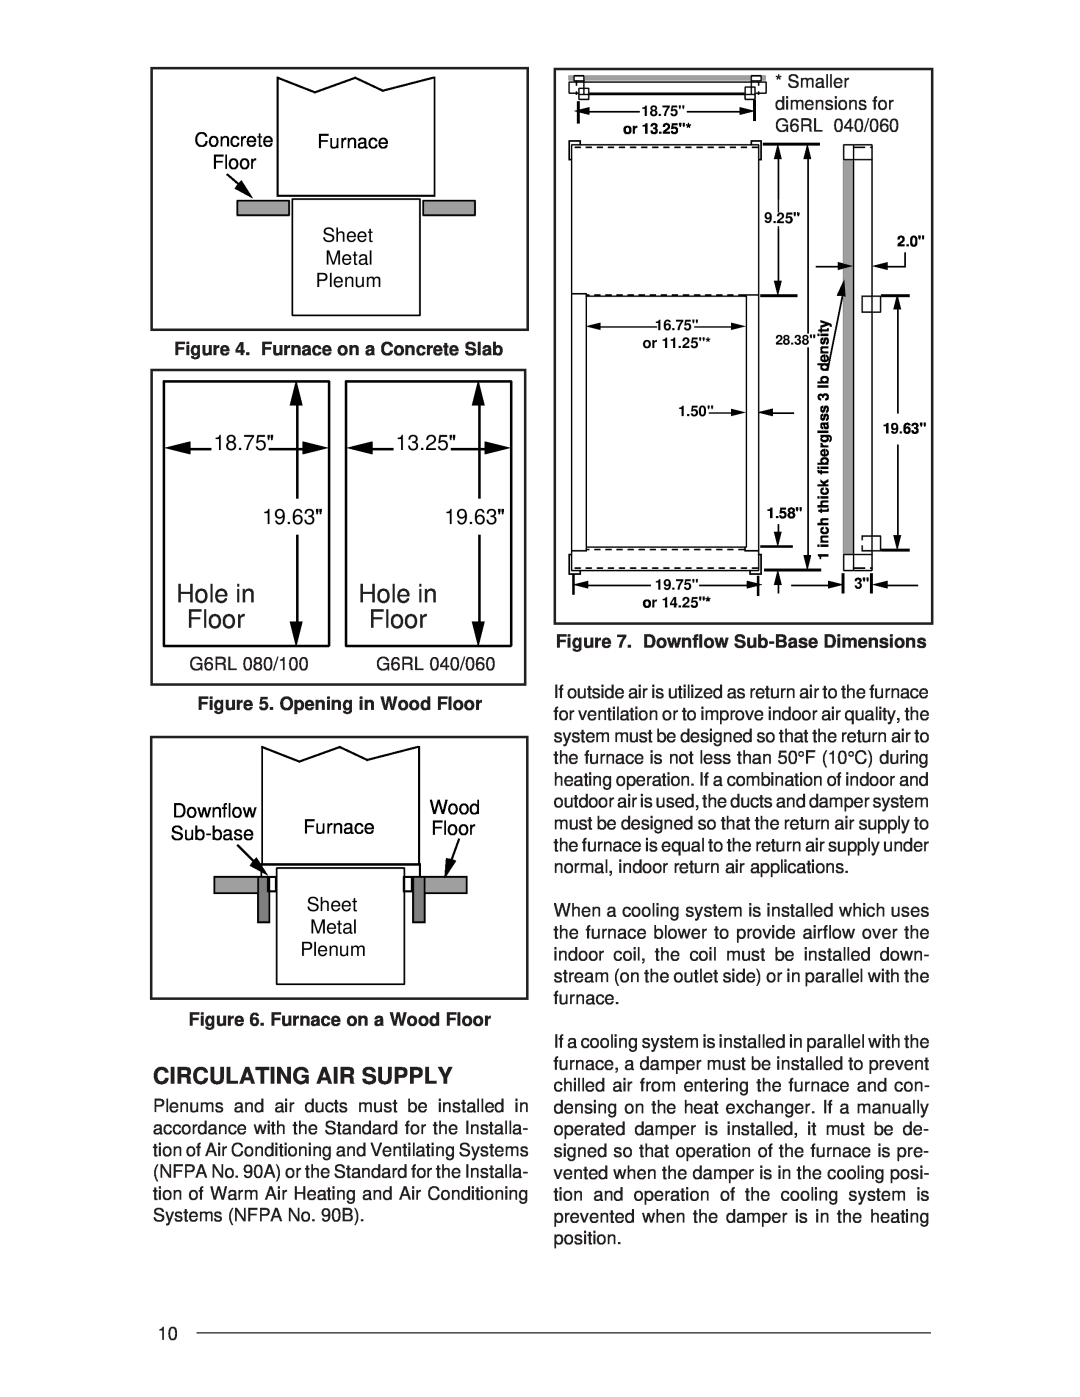 Nordyne G6RC 90+, G6RL 90+, G6RD 93+ installation instructions Circulating Air Supply, Hole in, Floor 